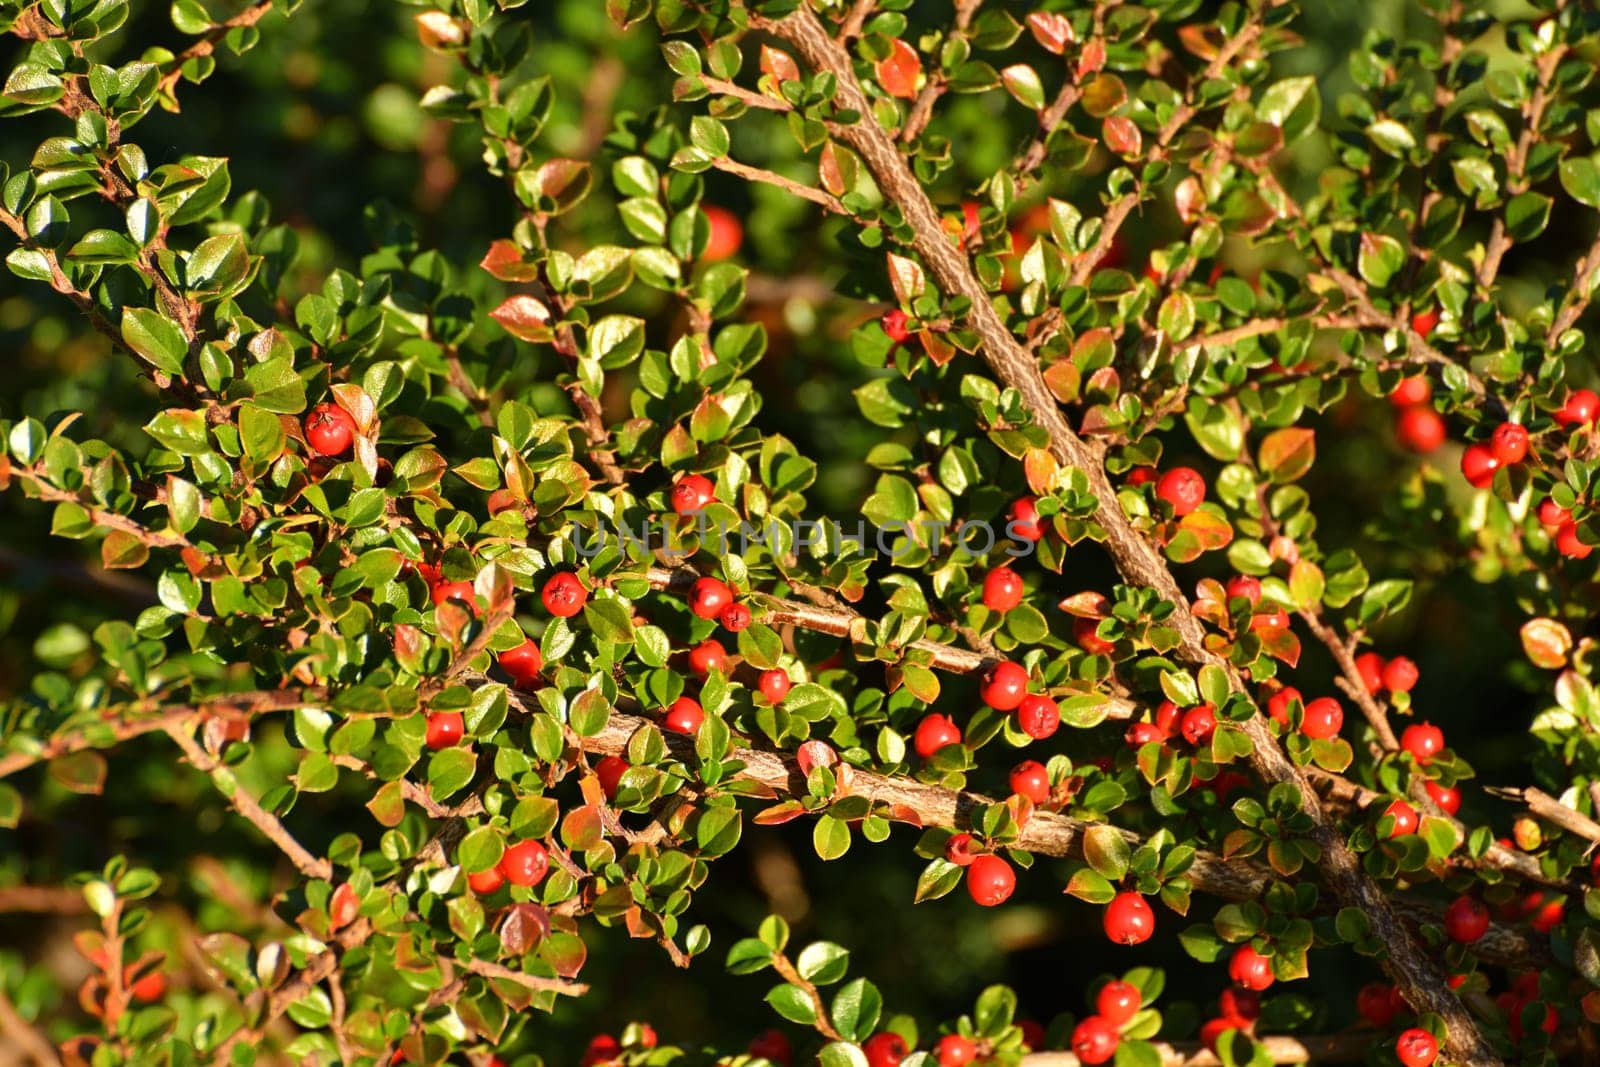 Cotoneaster - ornamental deciduous shrub with berries, used in landscape design. Autumn by olgavolodina